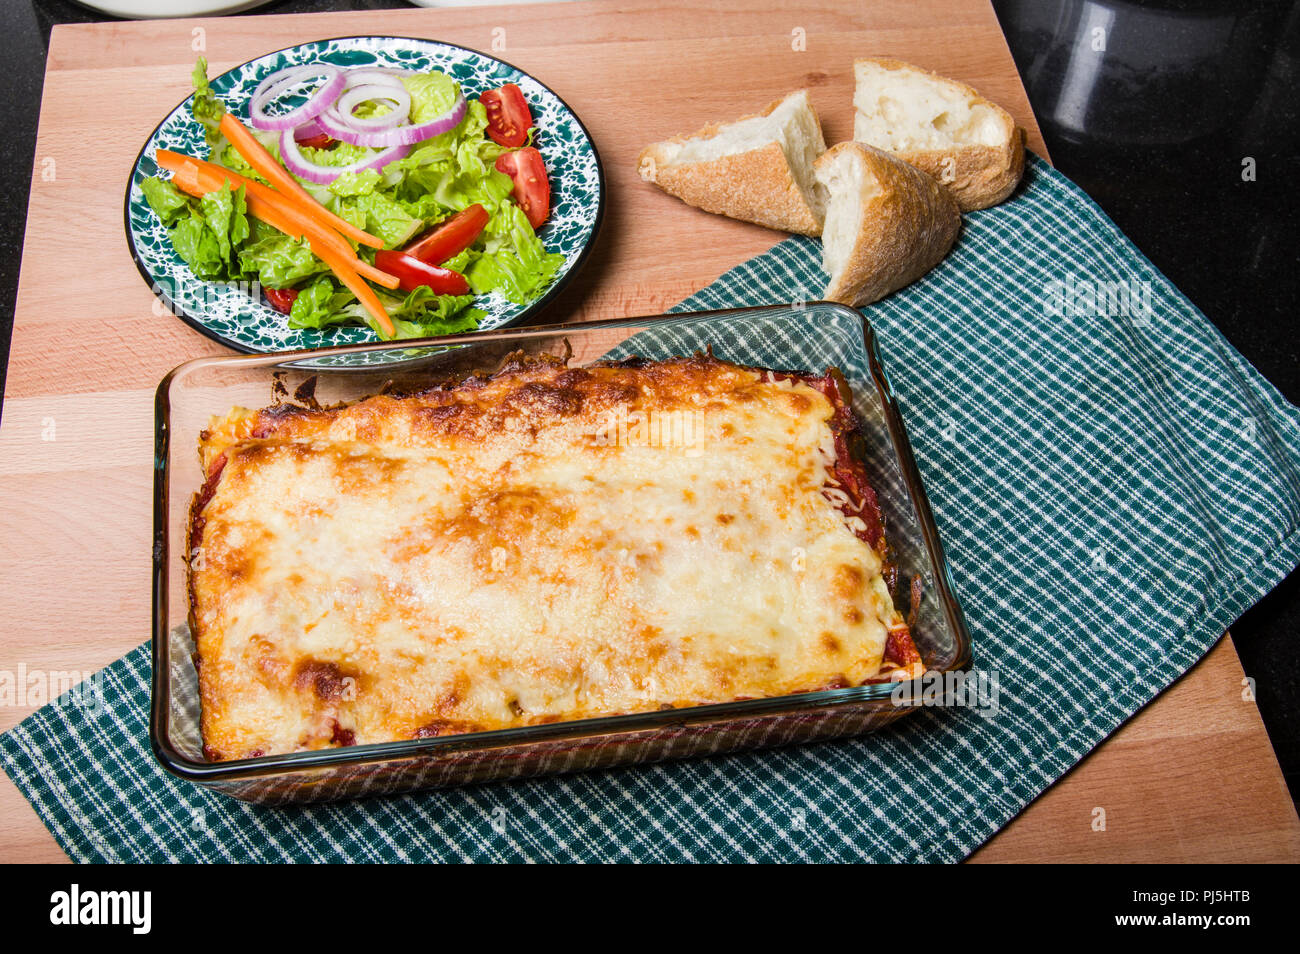 Baked lasagne in dish with salad and bread Stock Photo